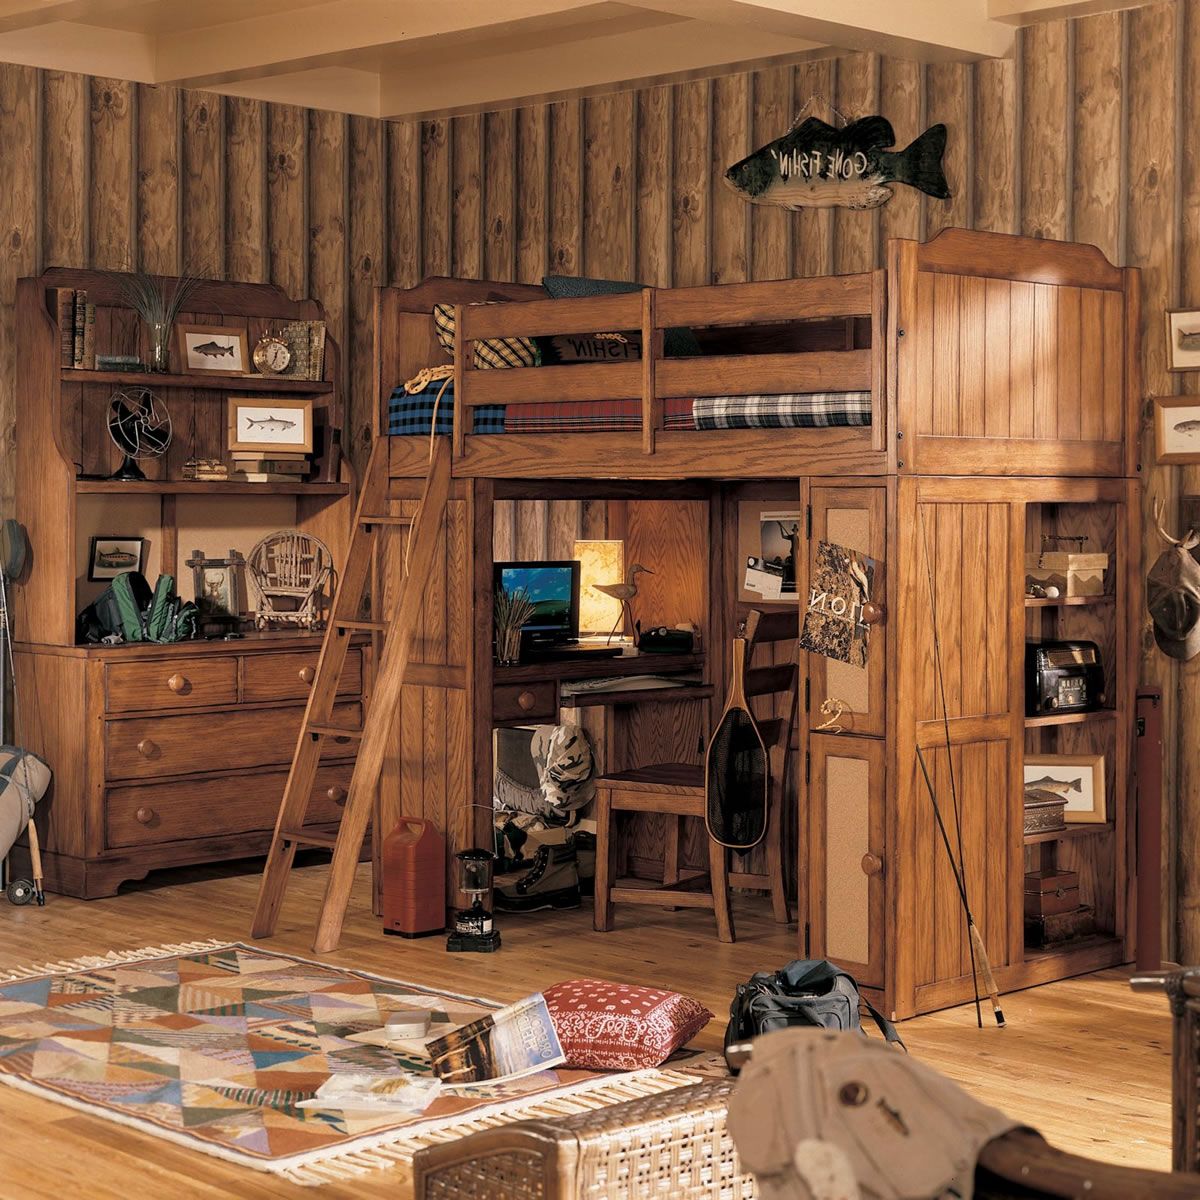 Vintage Boy Room Ideas With Inexpensive Cool Loft Bed And Captivating Rug Plus Herring Fish Wall Art (Photo 3143 of 7825)